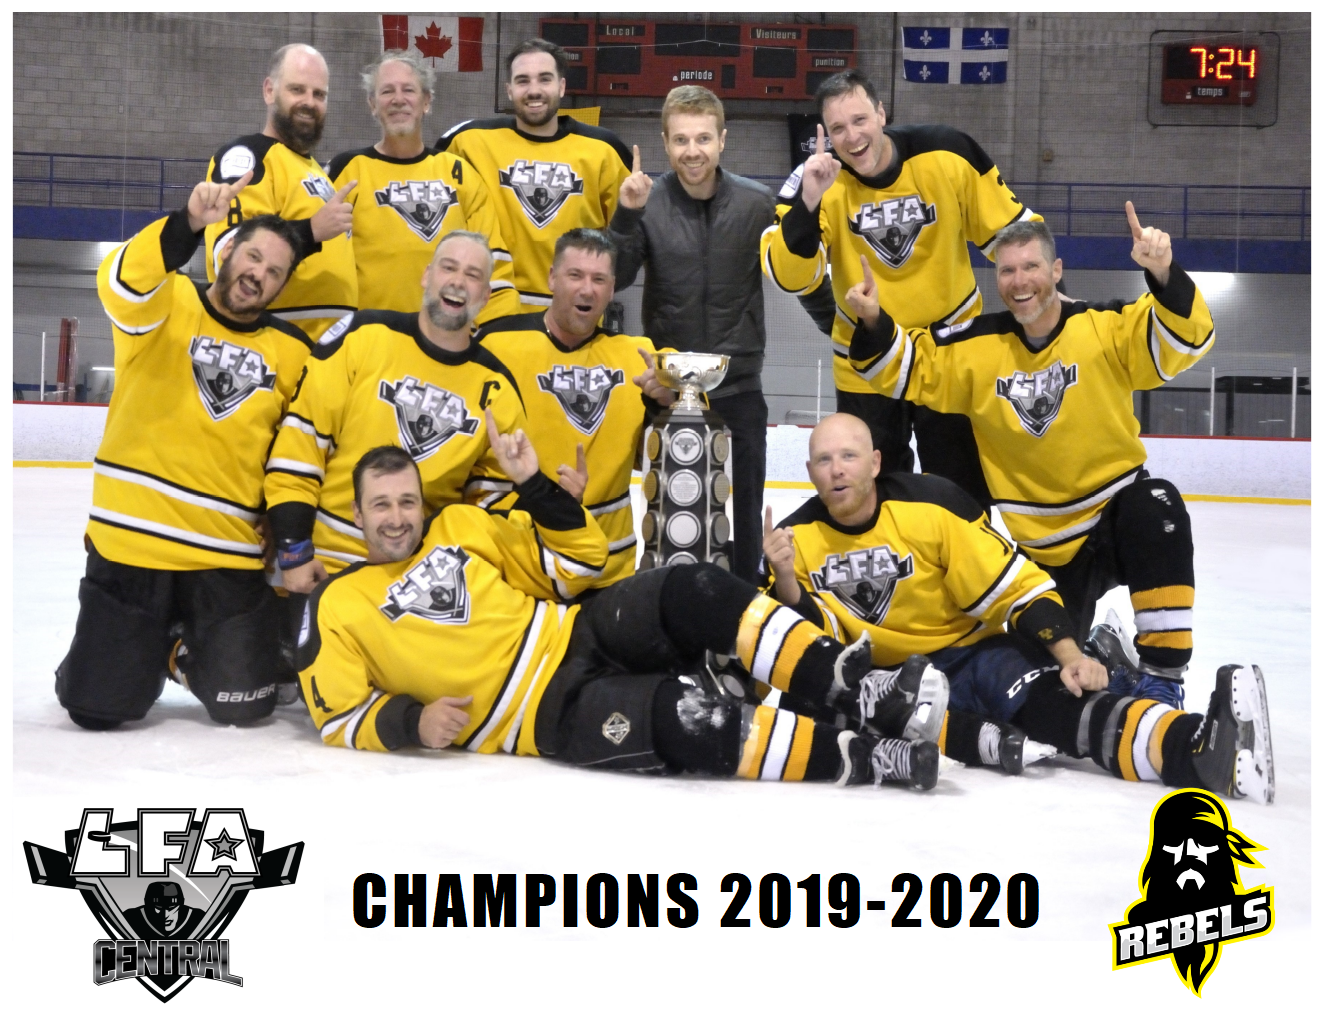 champions 2019-2020 (3).png